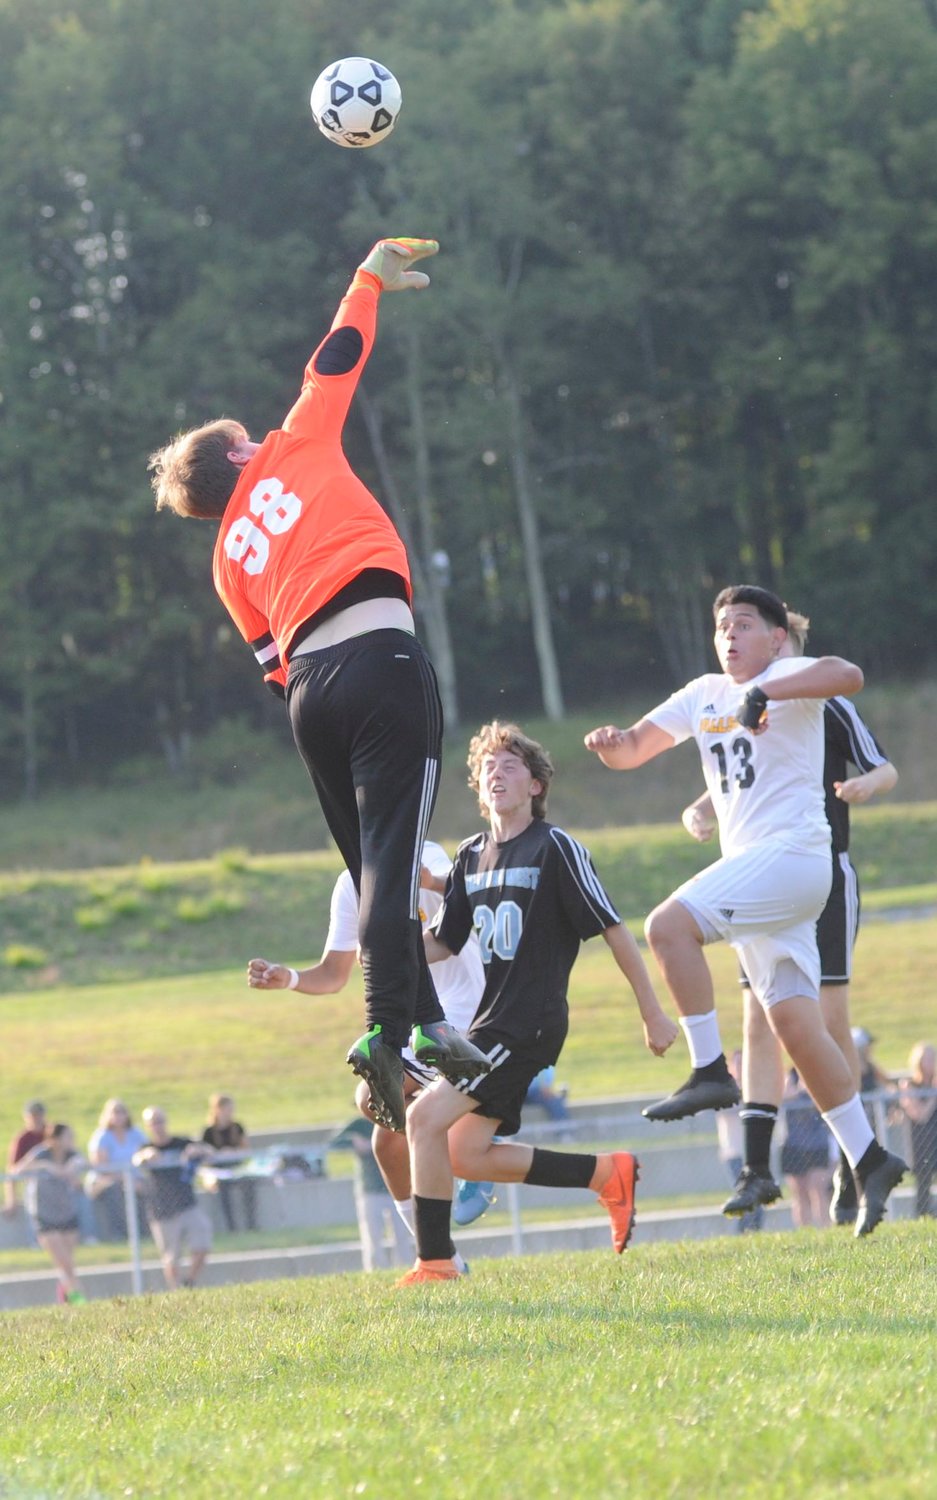 A valiant effort. Will Nearing, Sullivan West’s star goalie, leaps skyward to block a Fallsburg shot on goal. The senior co-captain posted 22 saves against the aggressive Comets’ offense. In the Downsville tourney, he saved the day 28 times.